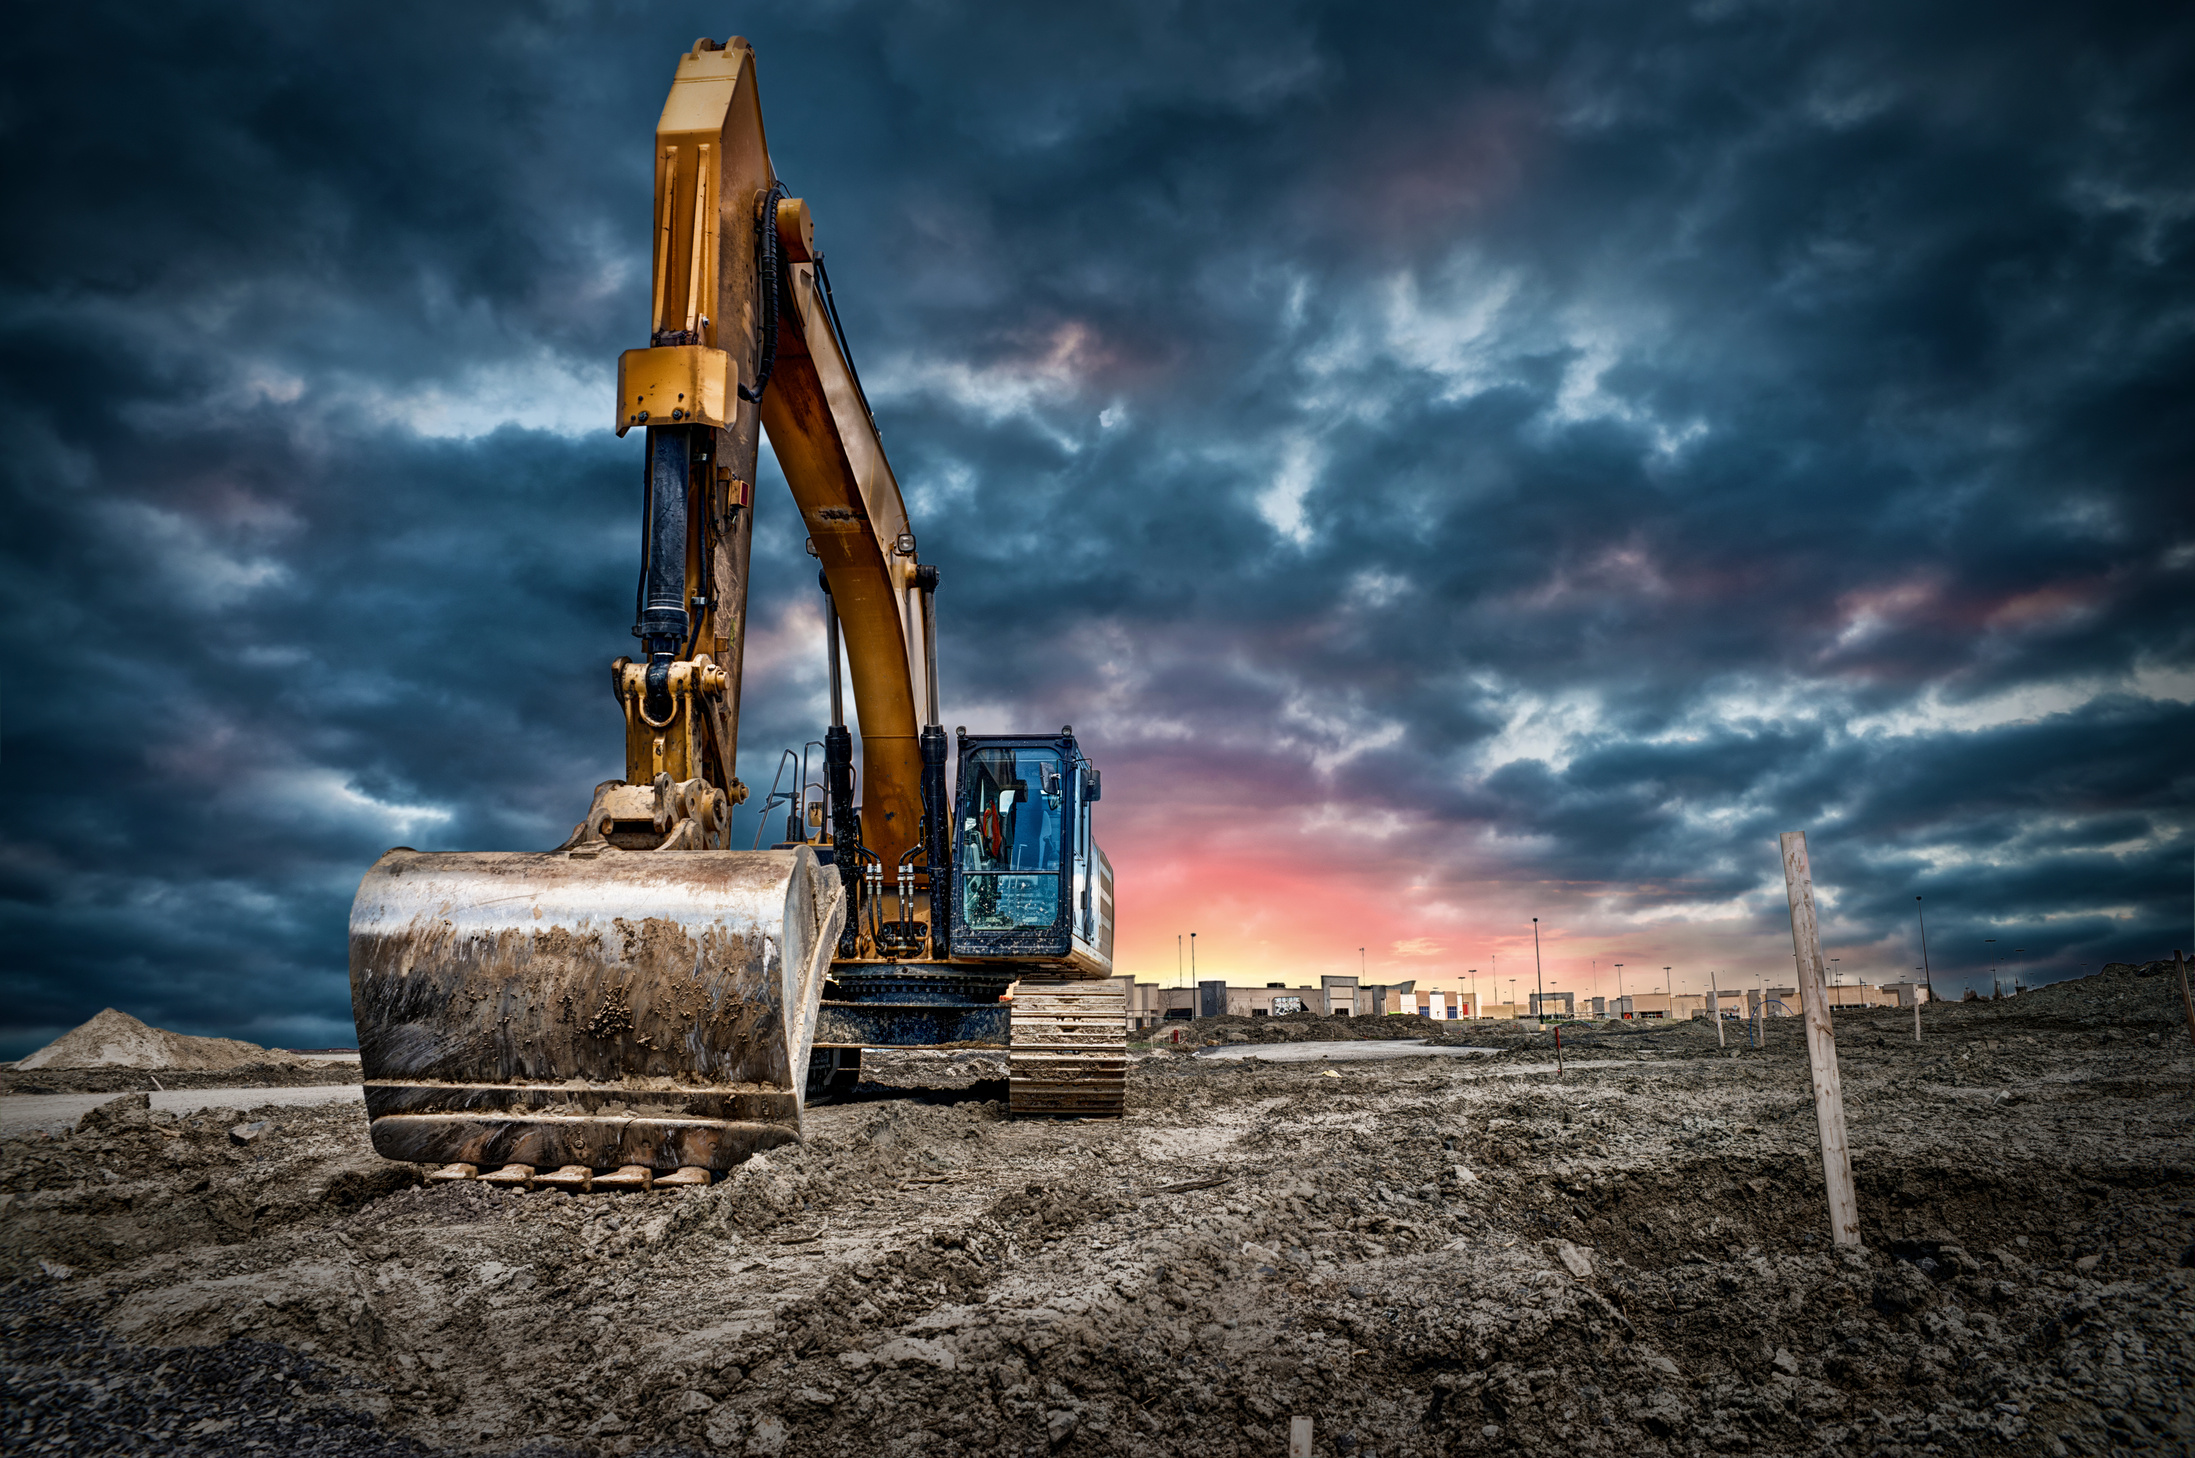 Excavator machinery at construction site